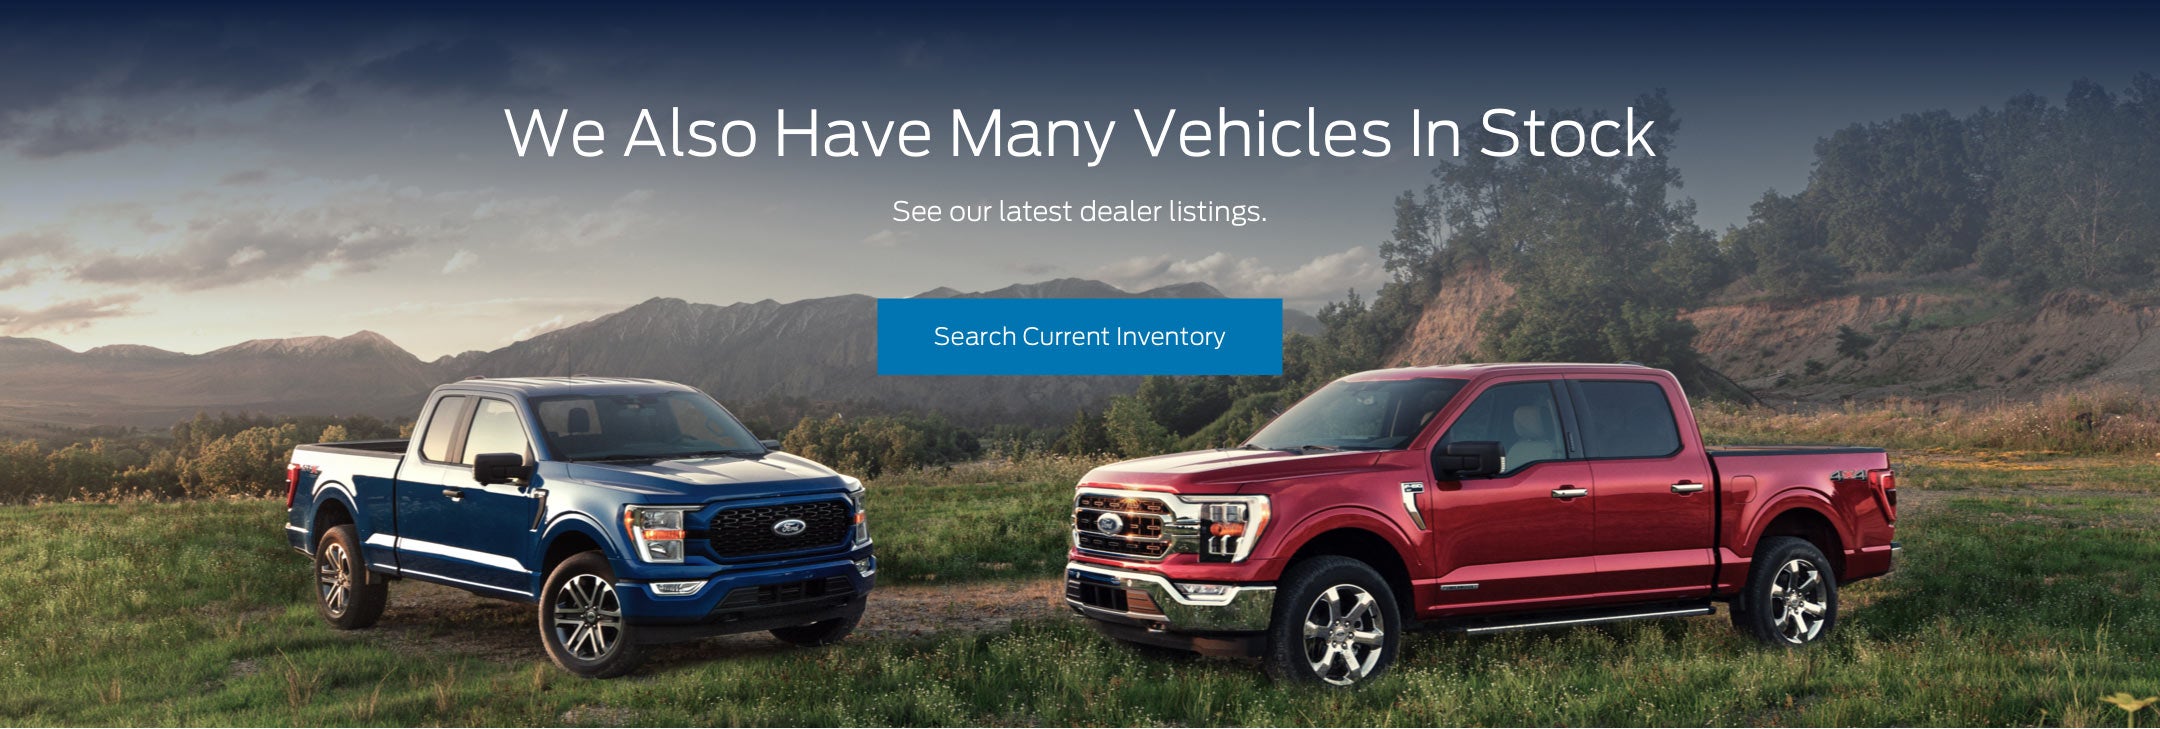 Ford vehicles in stock | Prince Frederick Ford in Prince Frederick MD